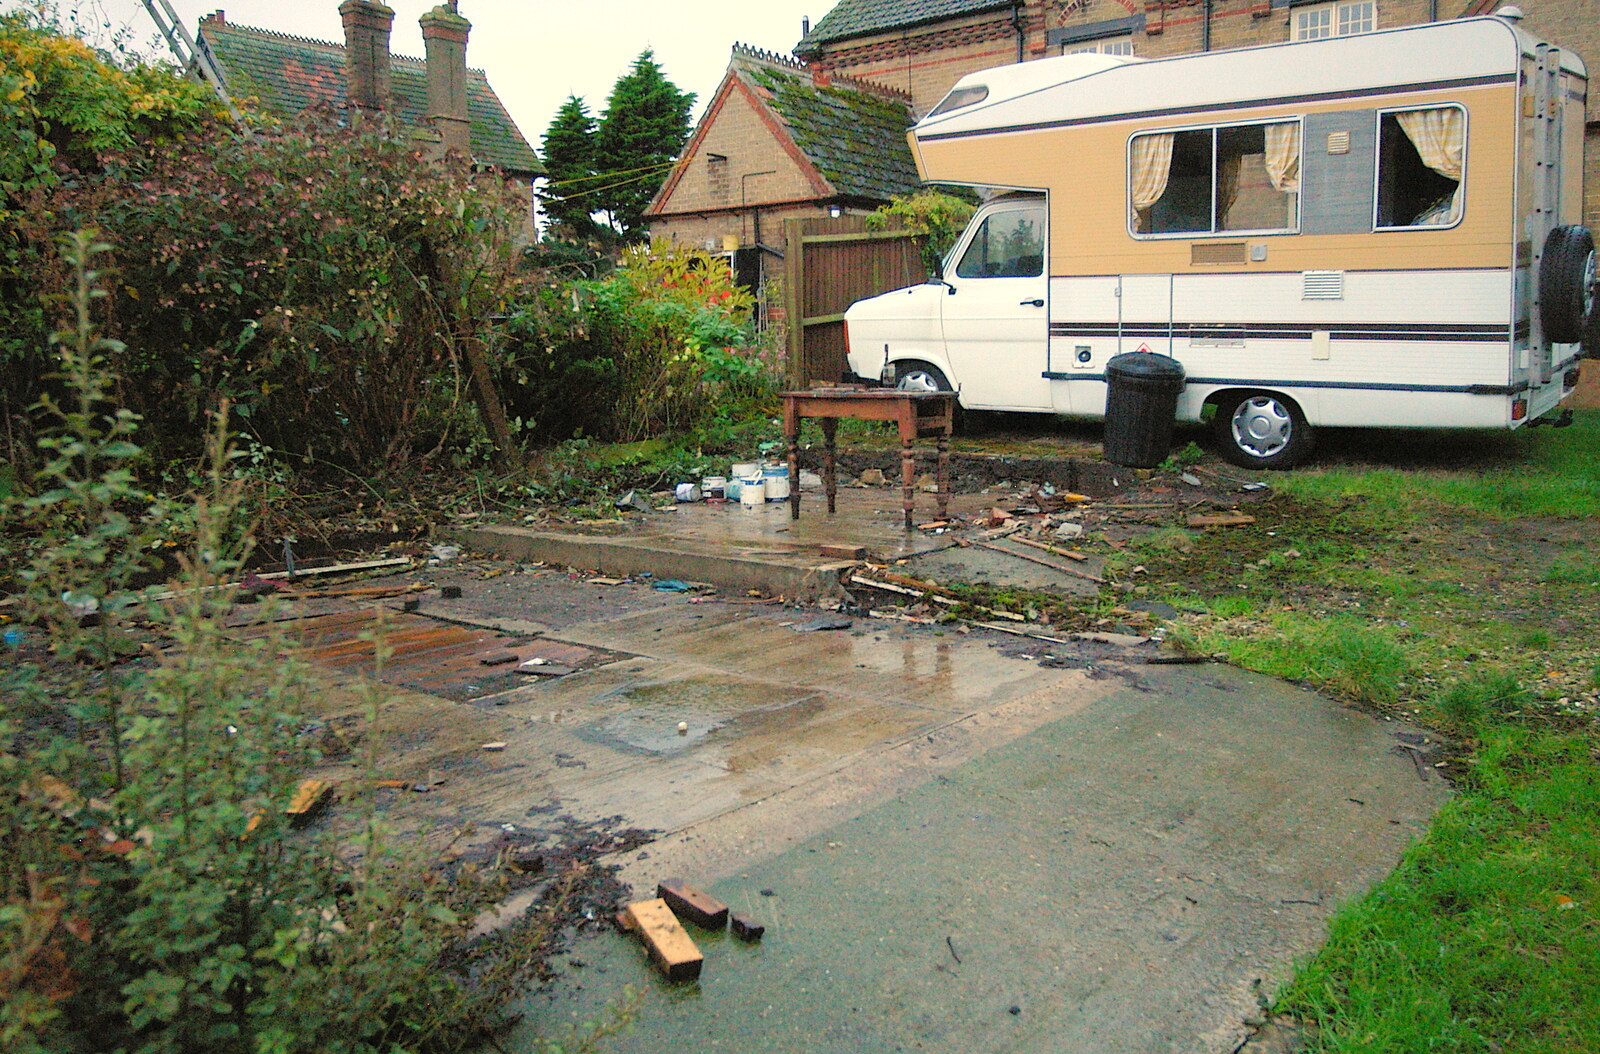 A table in the rain, and a camper van from Mother, Mike and the Stiffkey Light Shop, Cley and Holkham - 6th November 2005